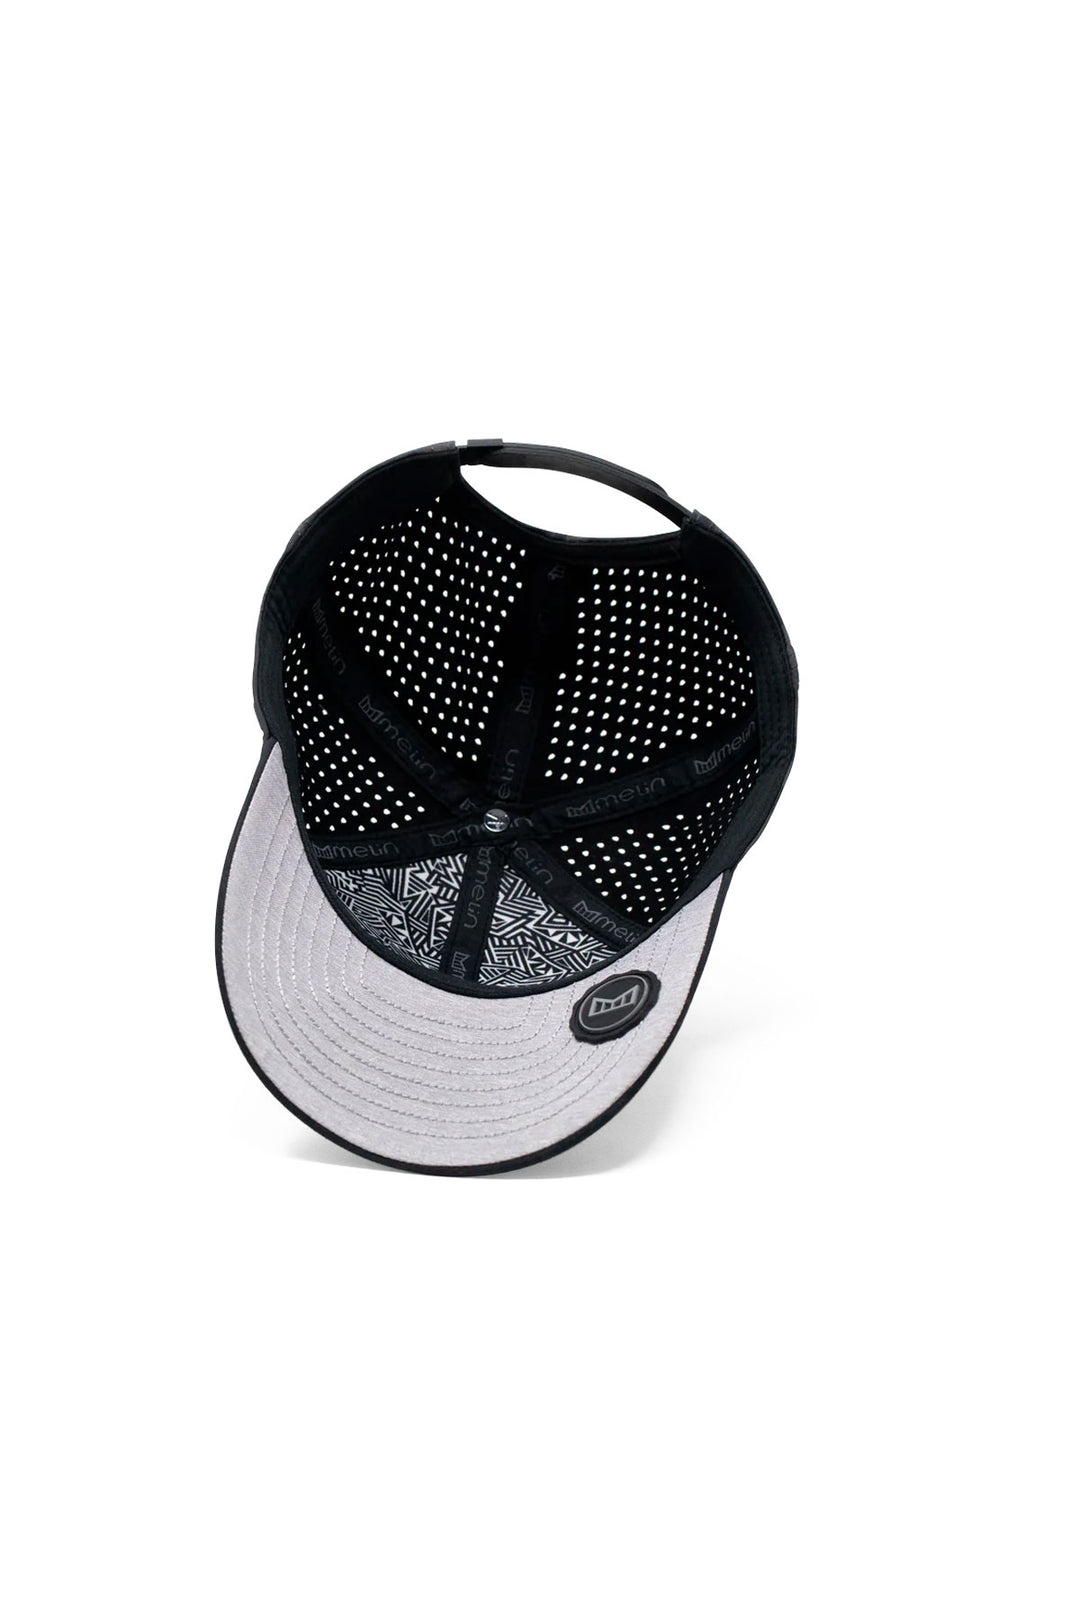 A-Game HYDRO Performance Cap